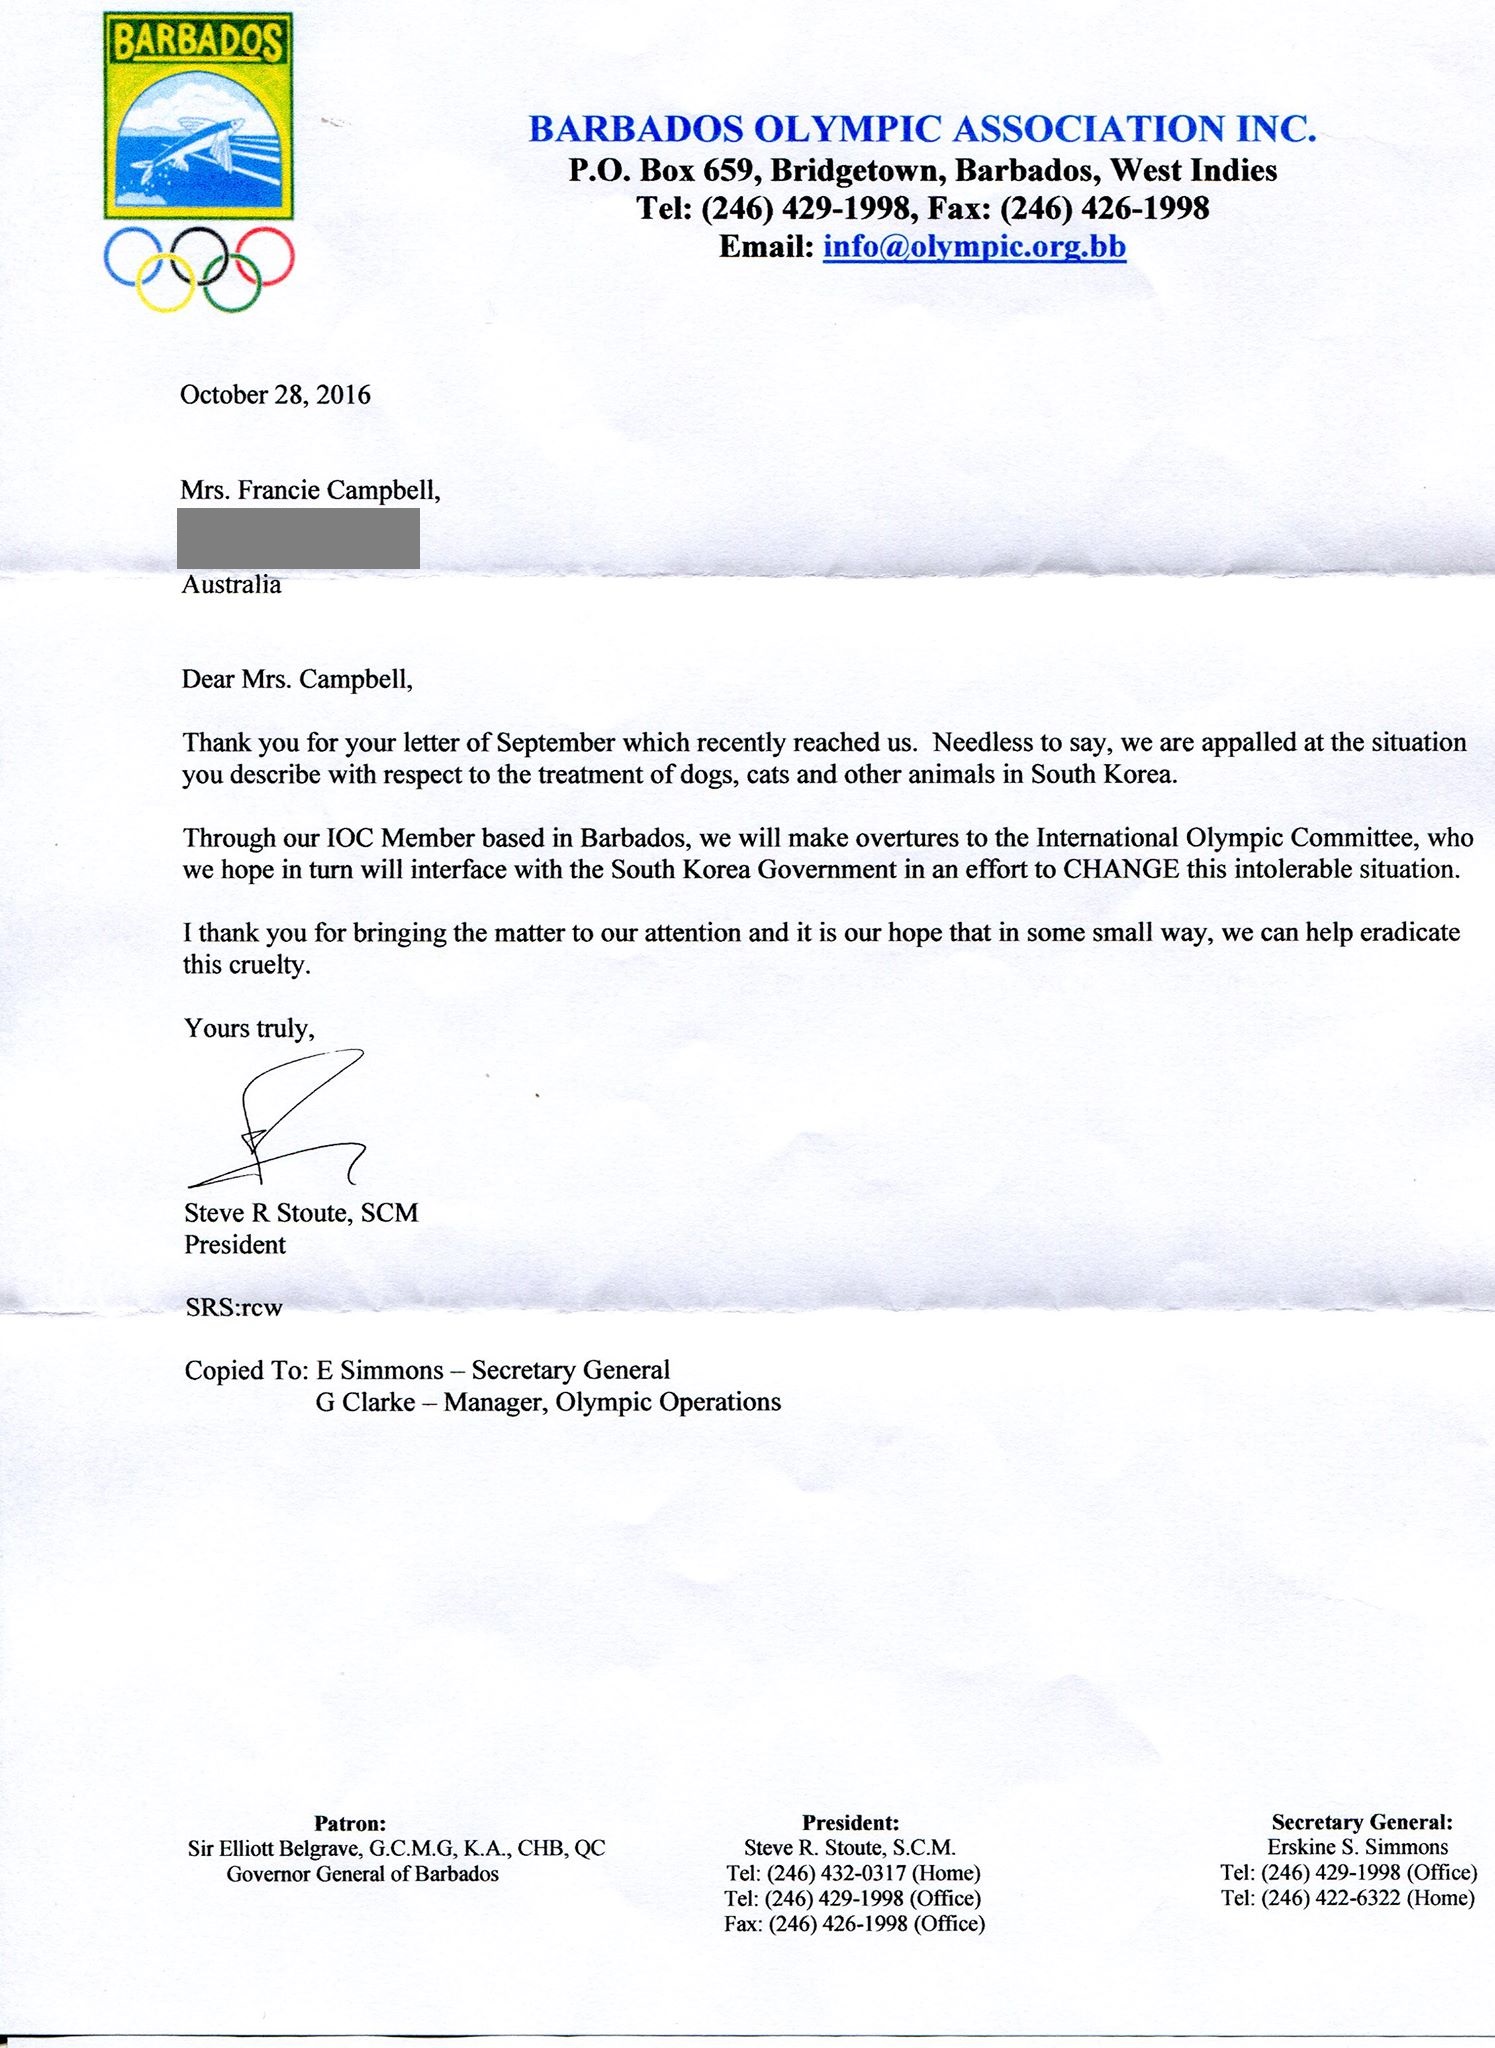  Barbados Olympic Association speaks out against cruelty! And we sincerely thank them!